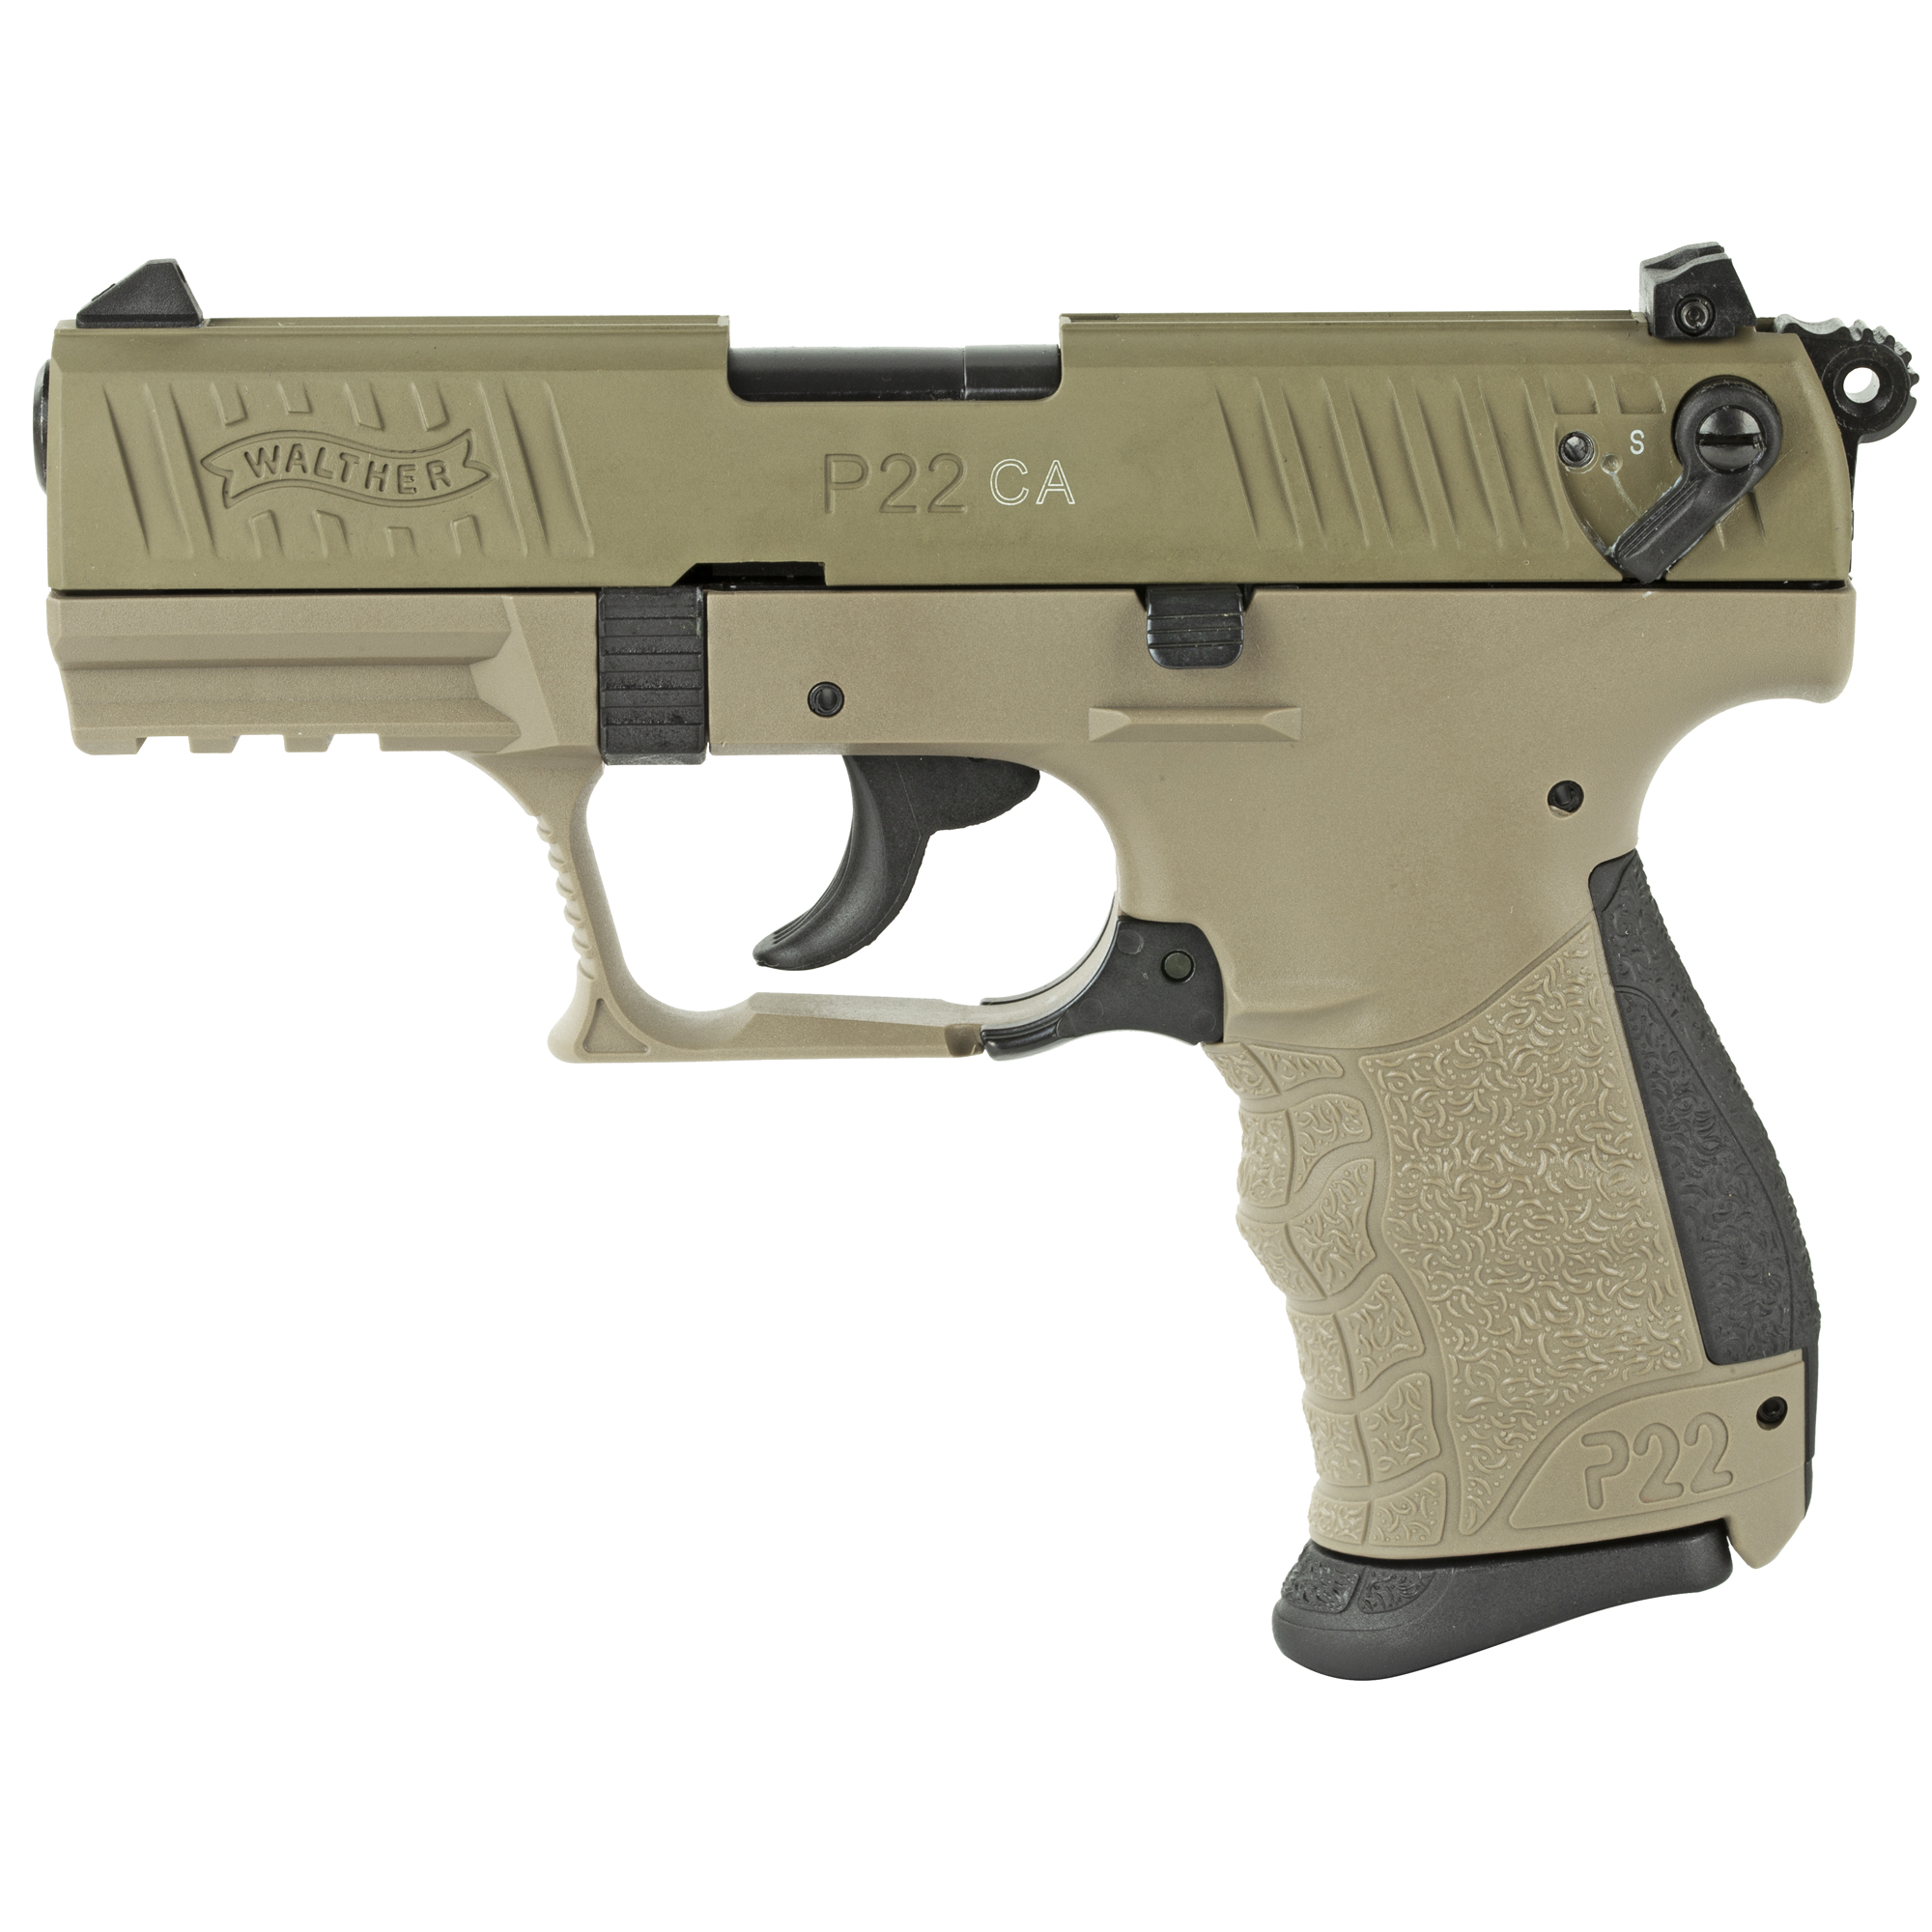 WALTHER P22 22LR 3.4 FDE 1-10RD CA